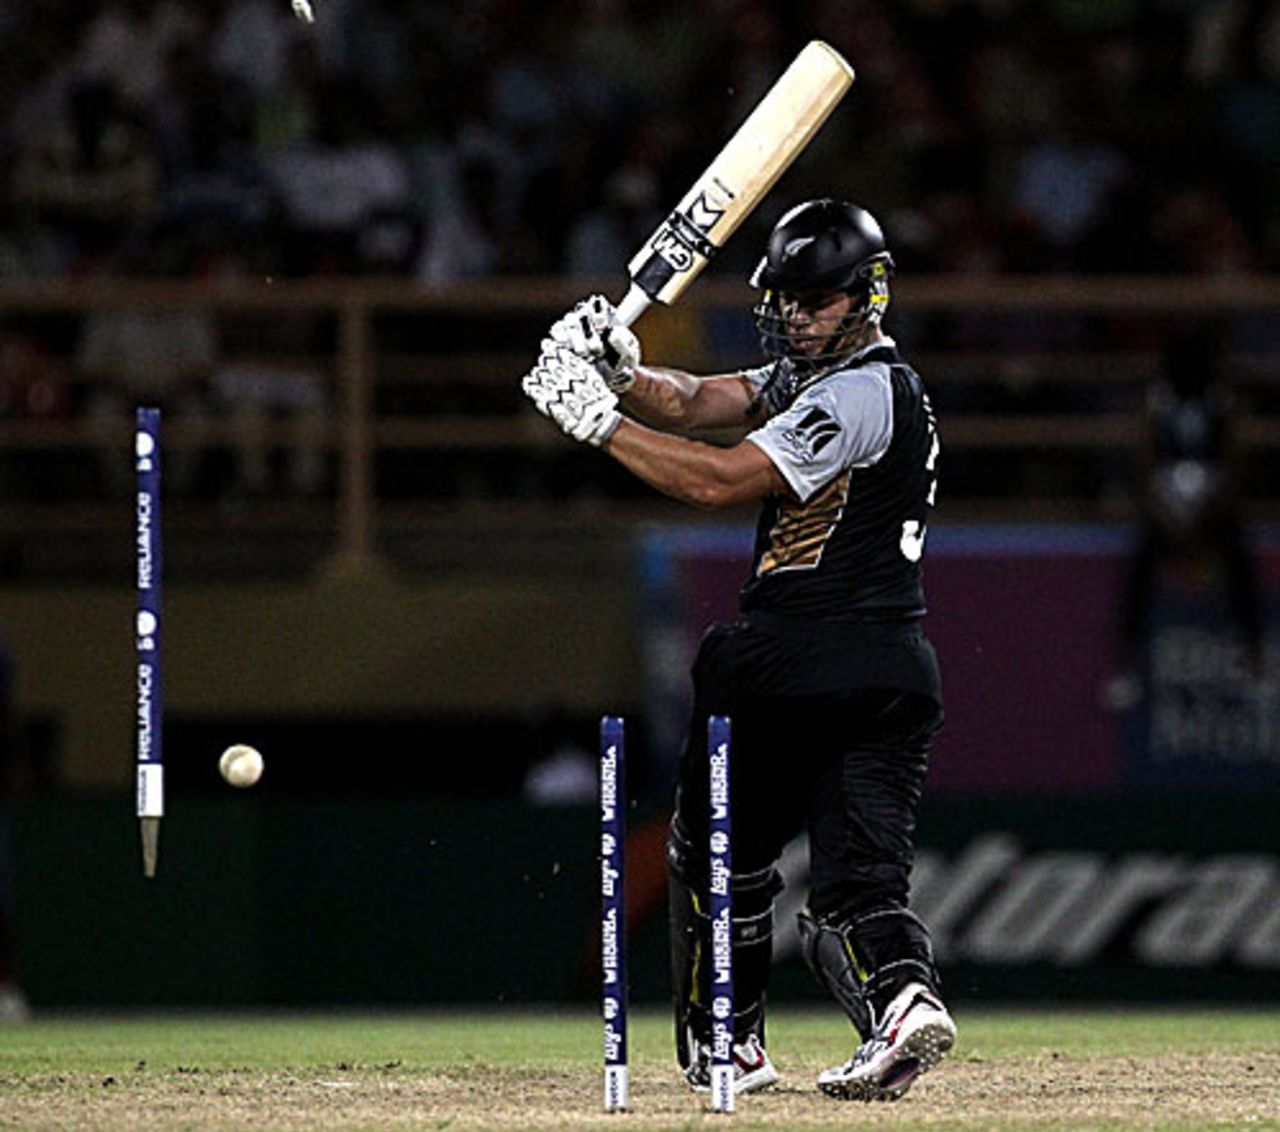 Ross Taylor loses his middle stump in spectacular manner to Ravi Rampaul, West Indies v New Zealand, ICC World Twenty20 warm-up, Guyana, April 28, 2010